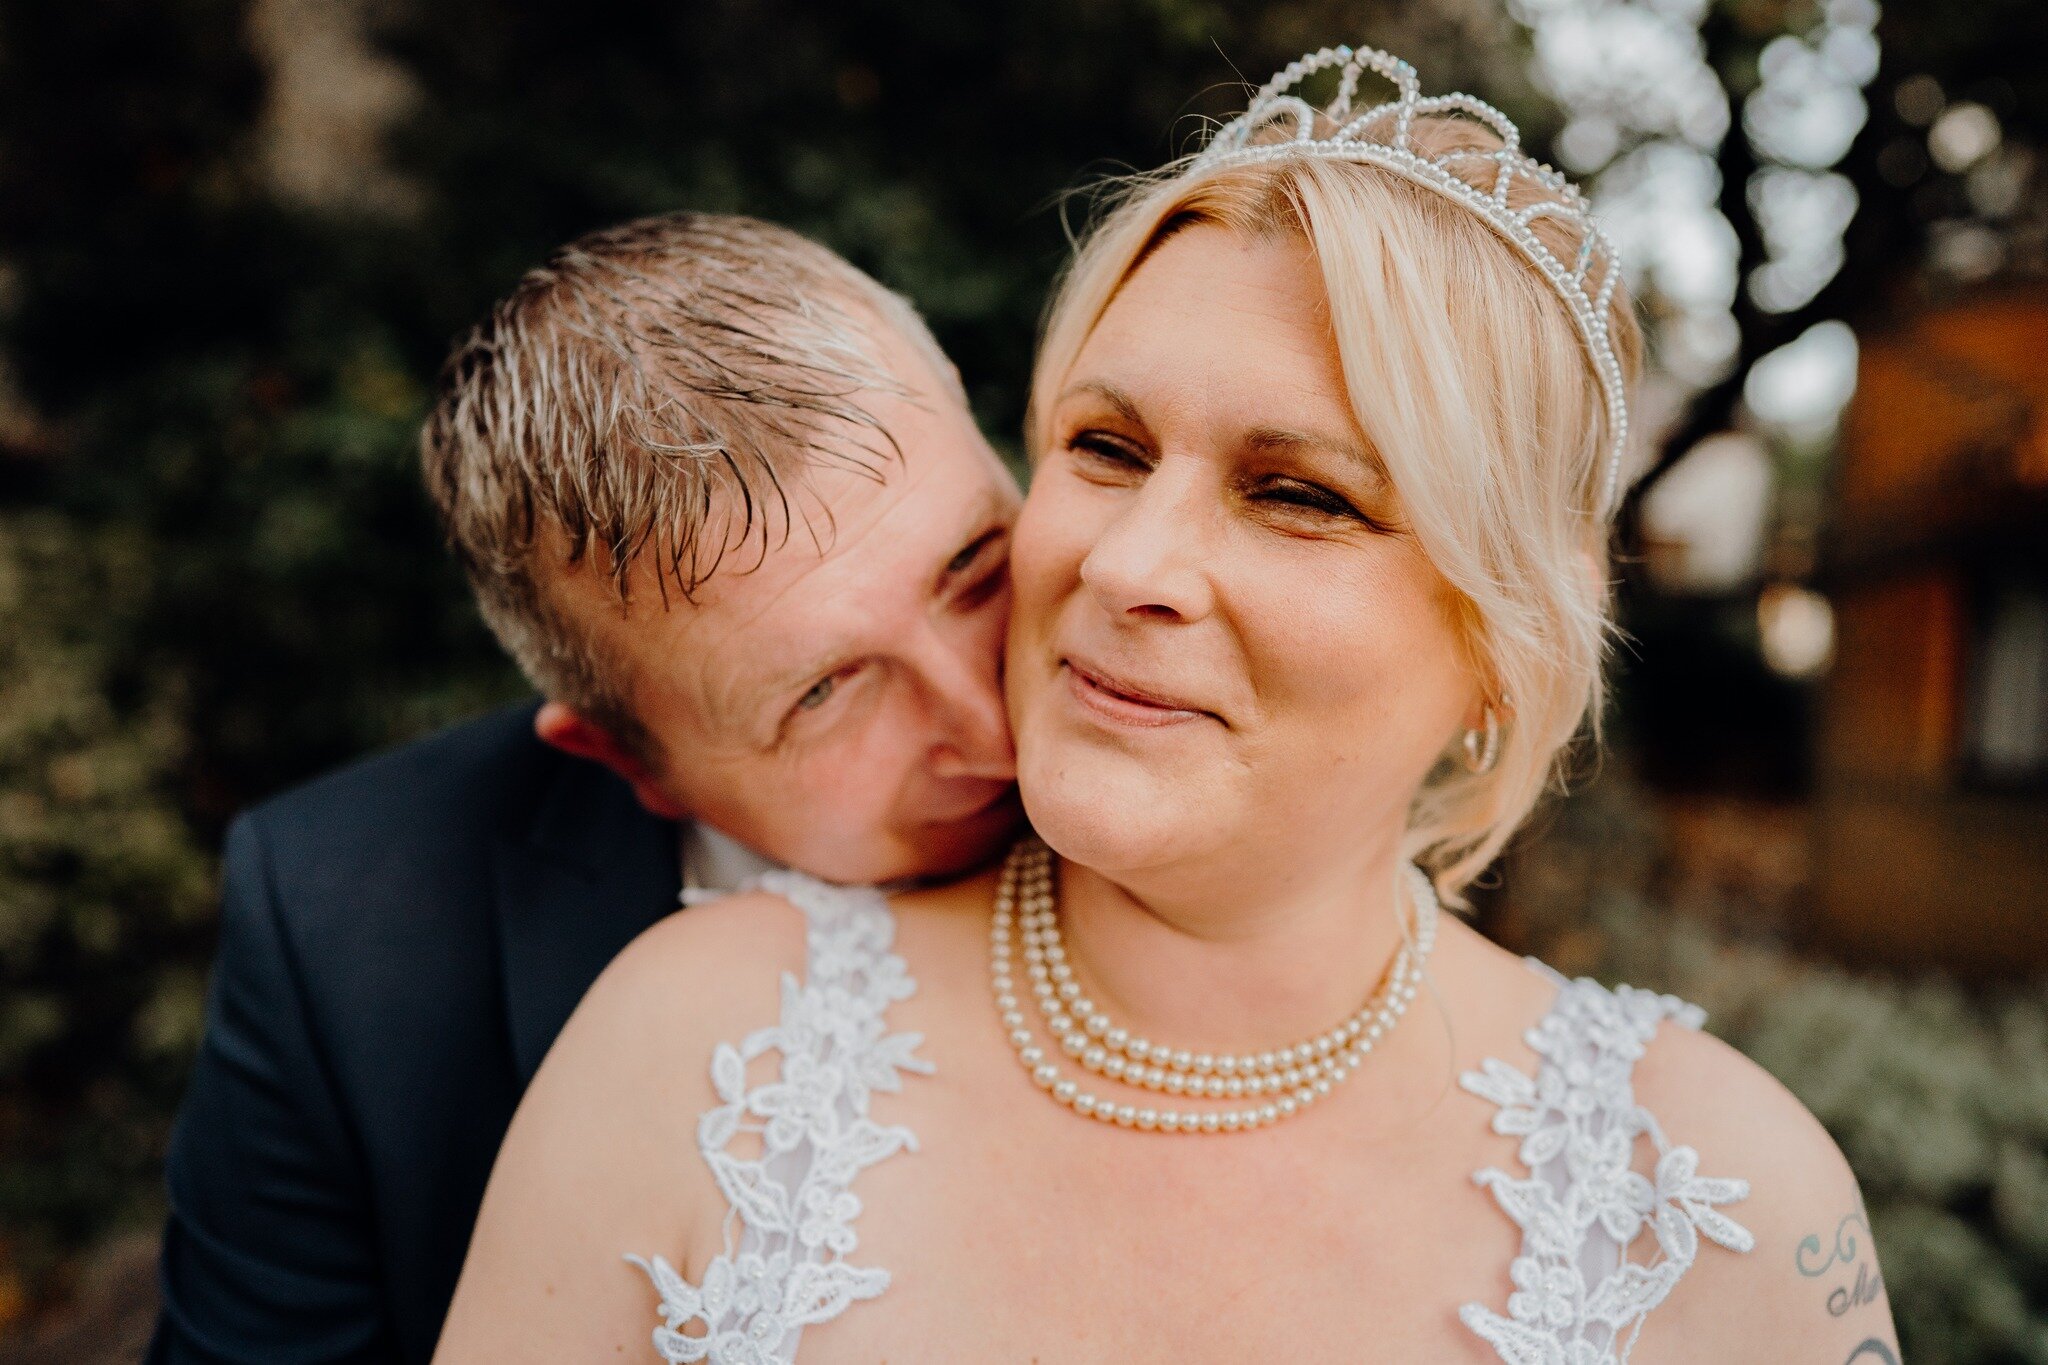 Georgina &amp; Dan 🥳

Had a great day down in Winchester @winchesterroyalhotel to capture Georgina &amp; Dans wedding! 
Hope you both had a great day...you certainly like to have a laugh 😂

Enjoy married life guys! #hampshirebride #hampshirewedding